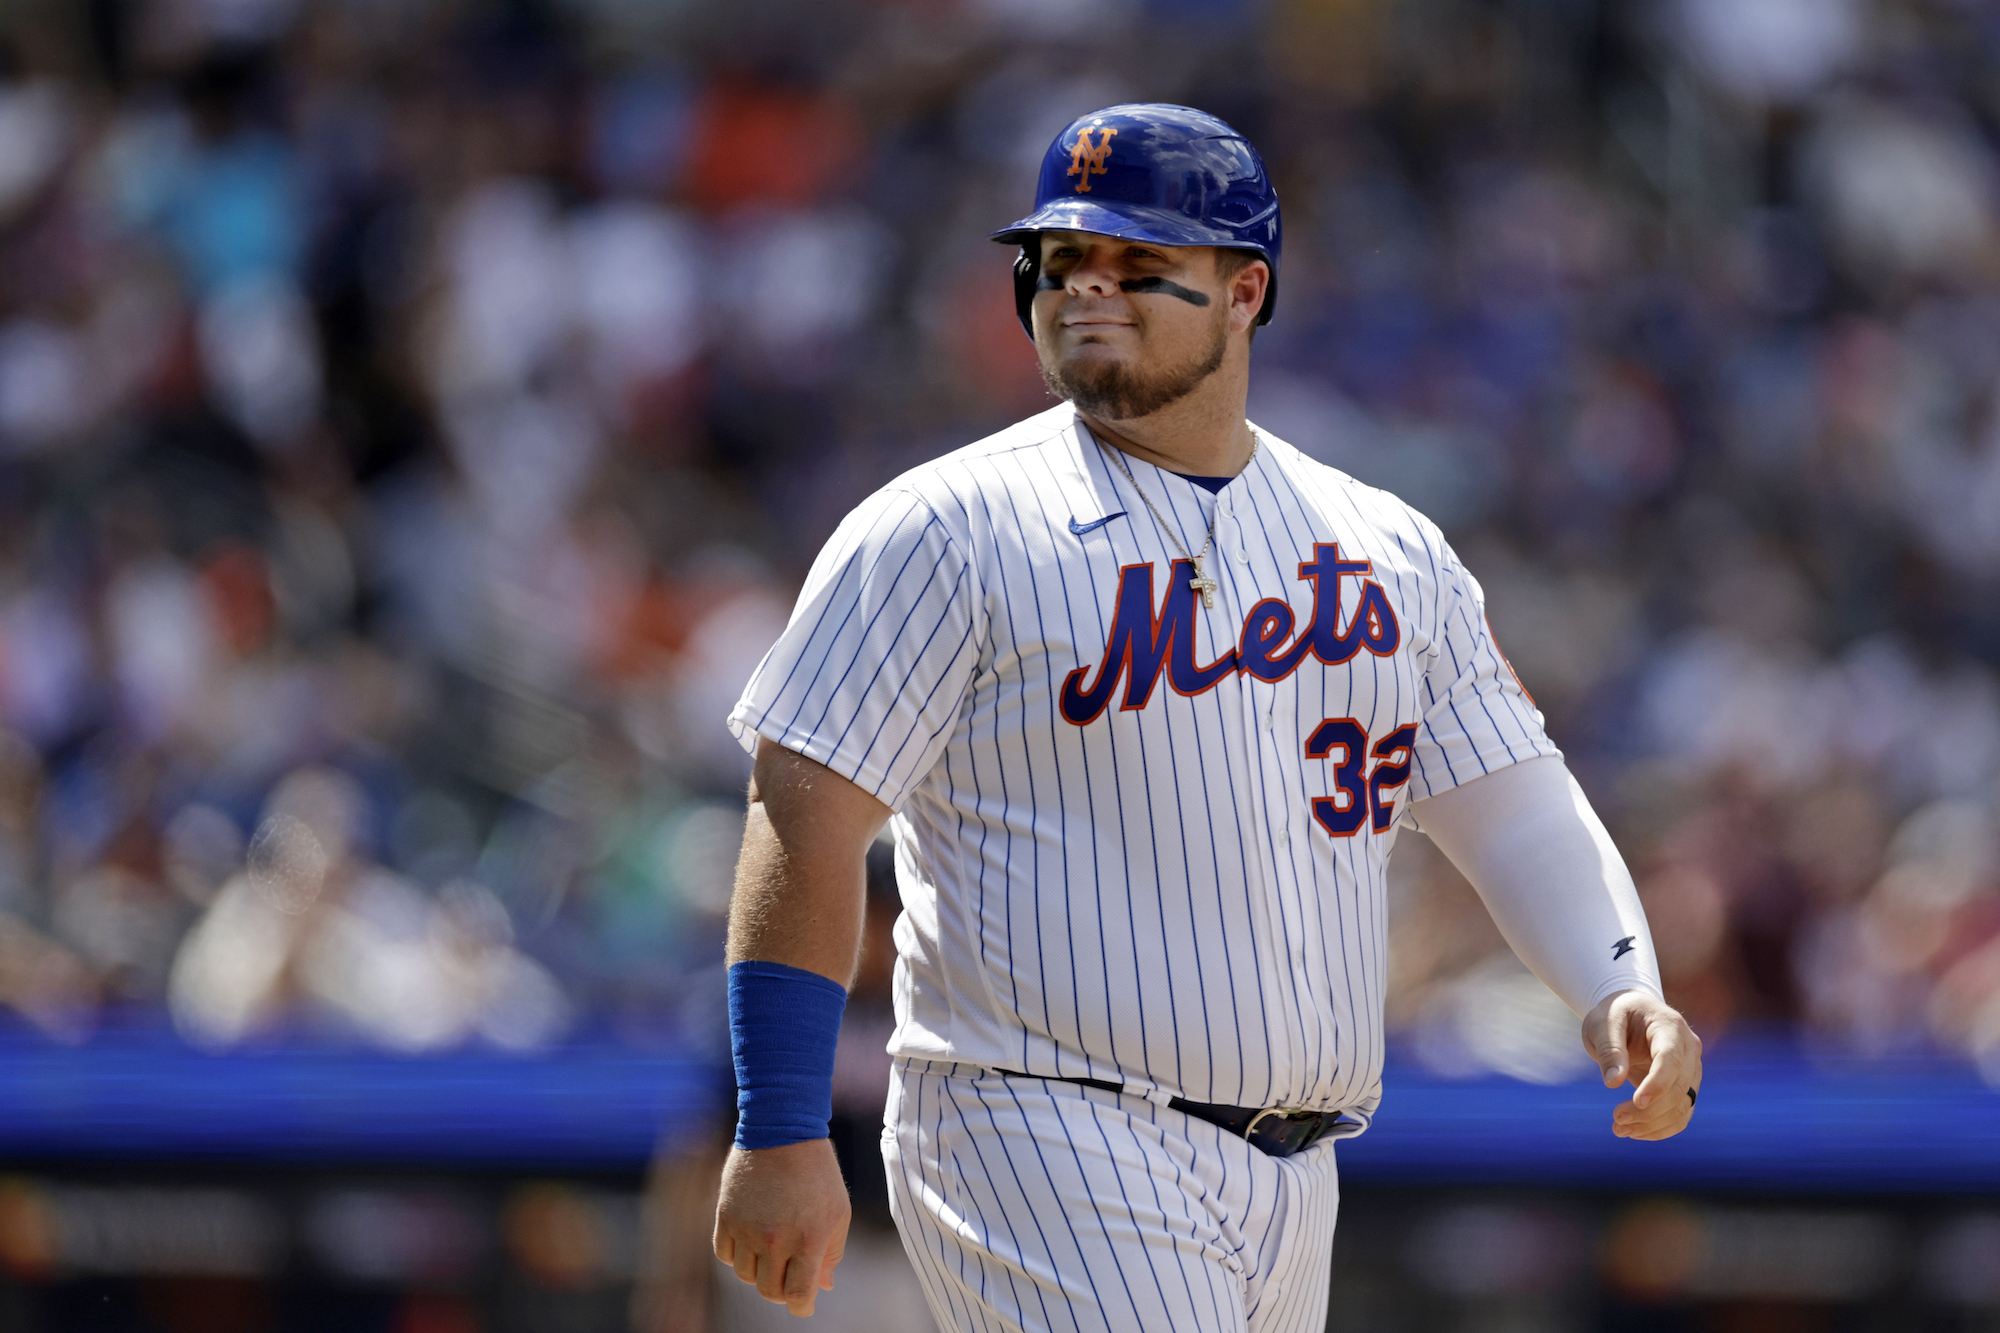 NEW YORK, NY - AUGUST 6: Daniel Vogelbach #32 of the New York Mets reacts after being walked during the fifth inning against the Atlanta Braves in the first game of a doubleheader at Citi Field on August 6, 2022 in the Queens borough of New York City. The Mets won 8-5. (Photo by Adam Hunger/Getty Images)